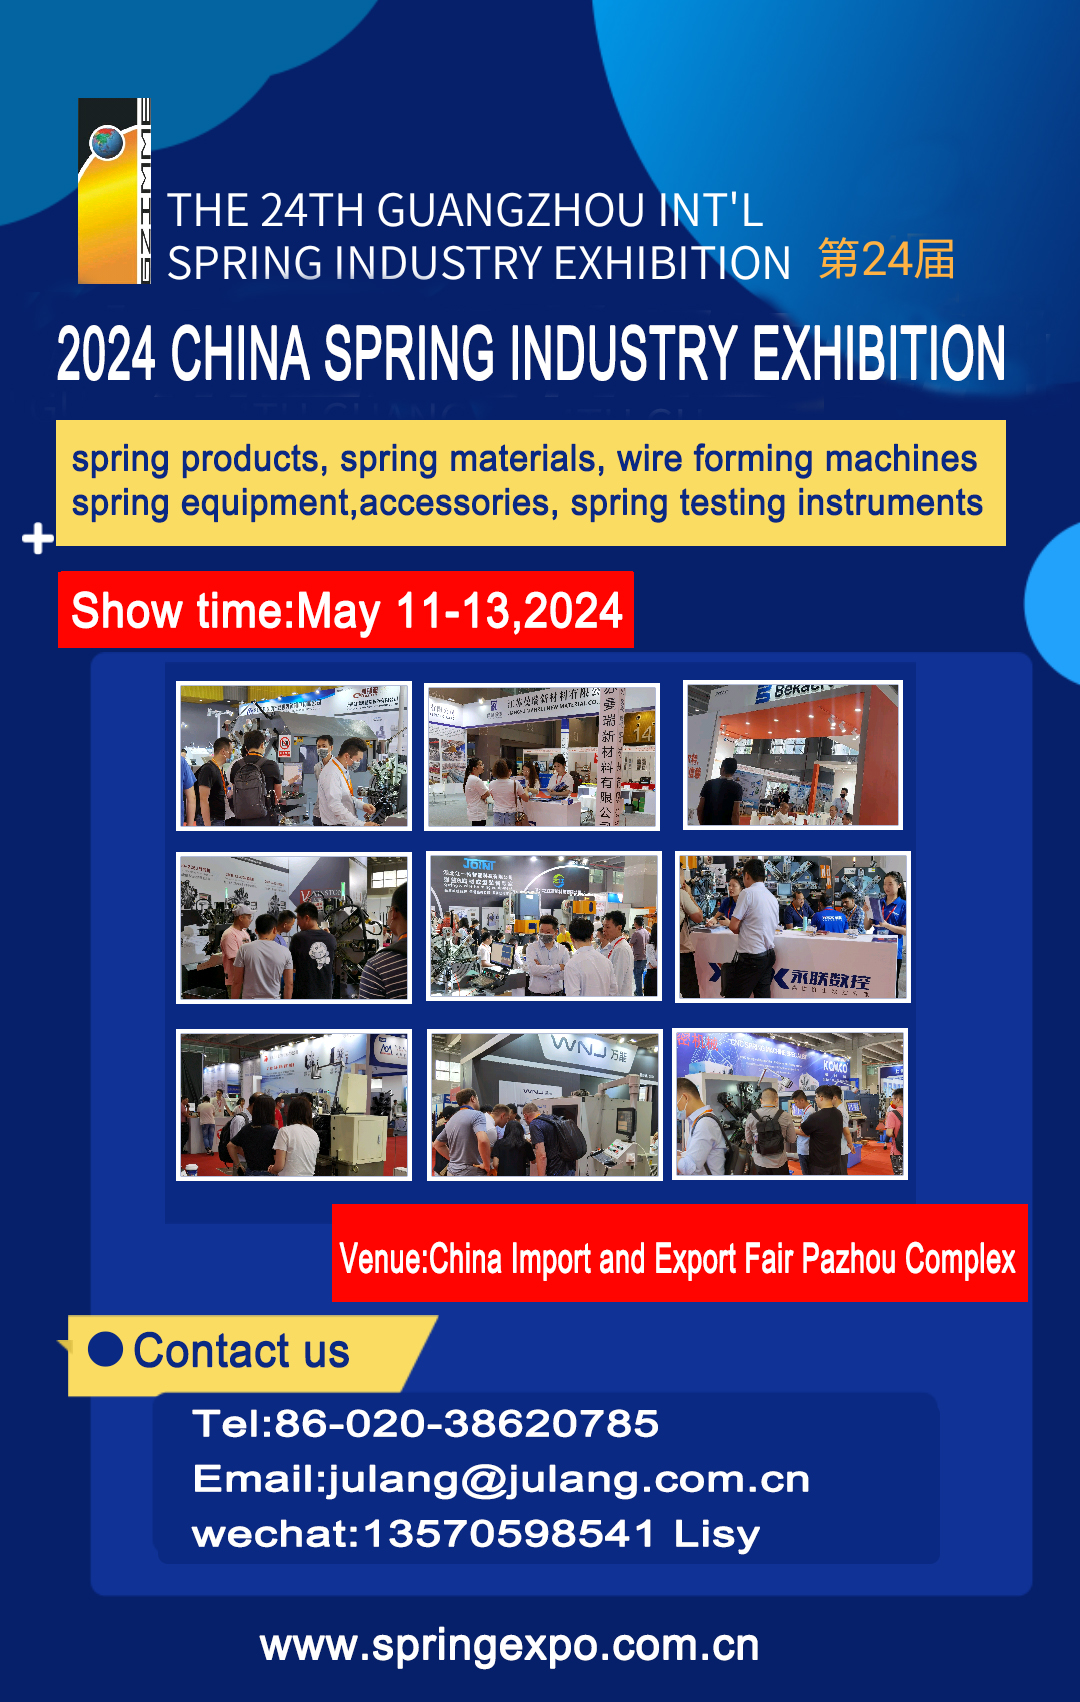 THE 24th CHINA(GUANGZHOU) INT’L SPRING INDUSTRY EXHIBITION